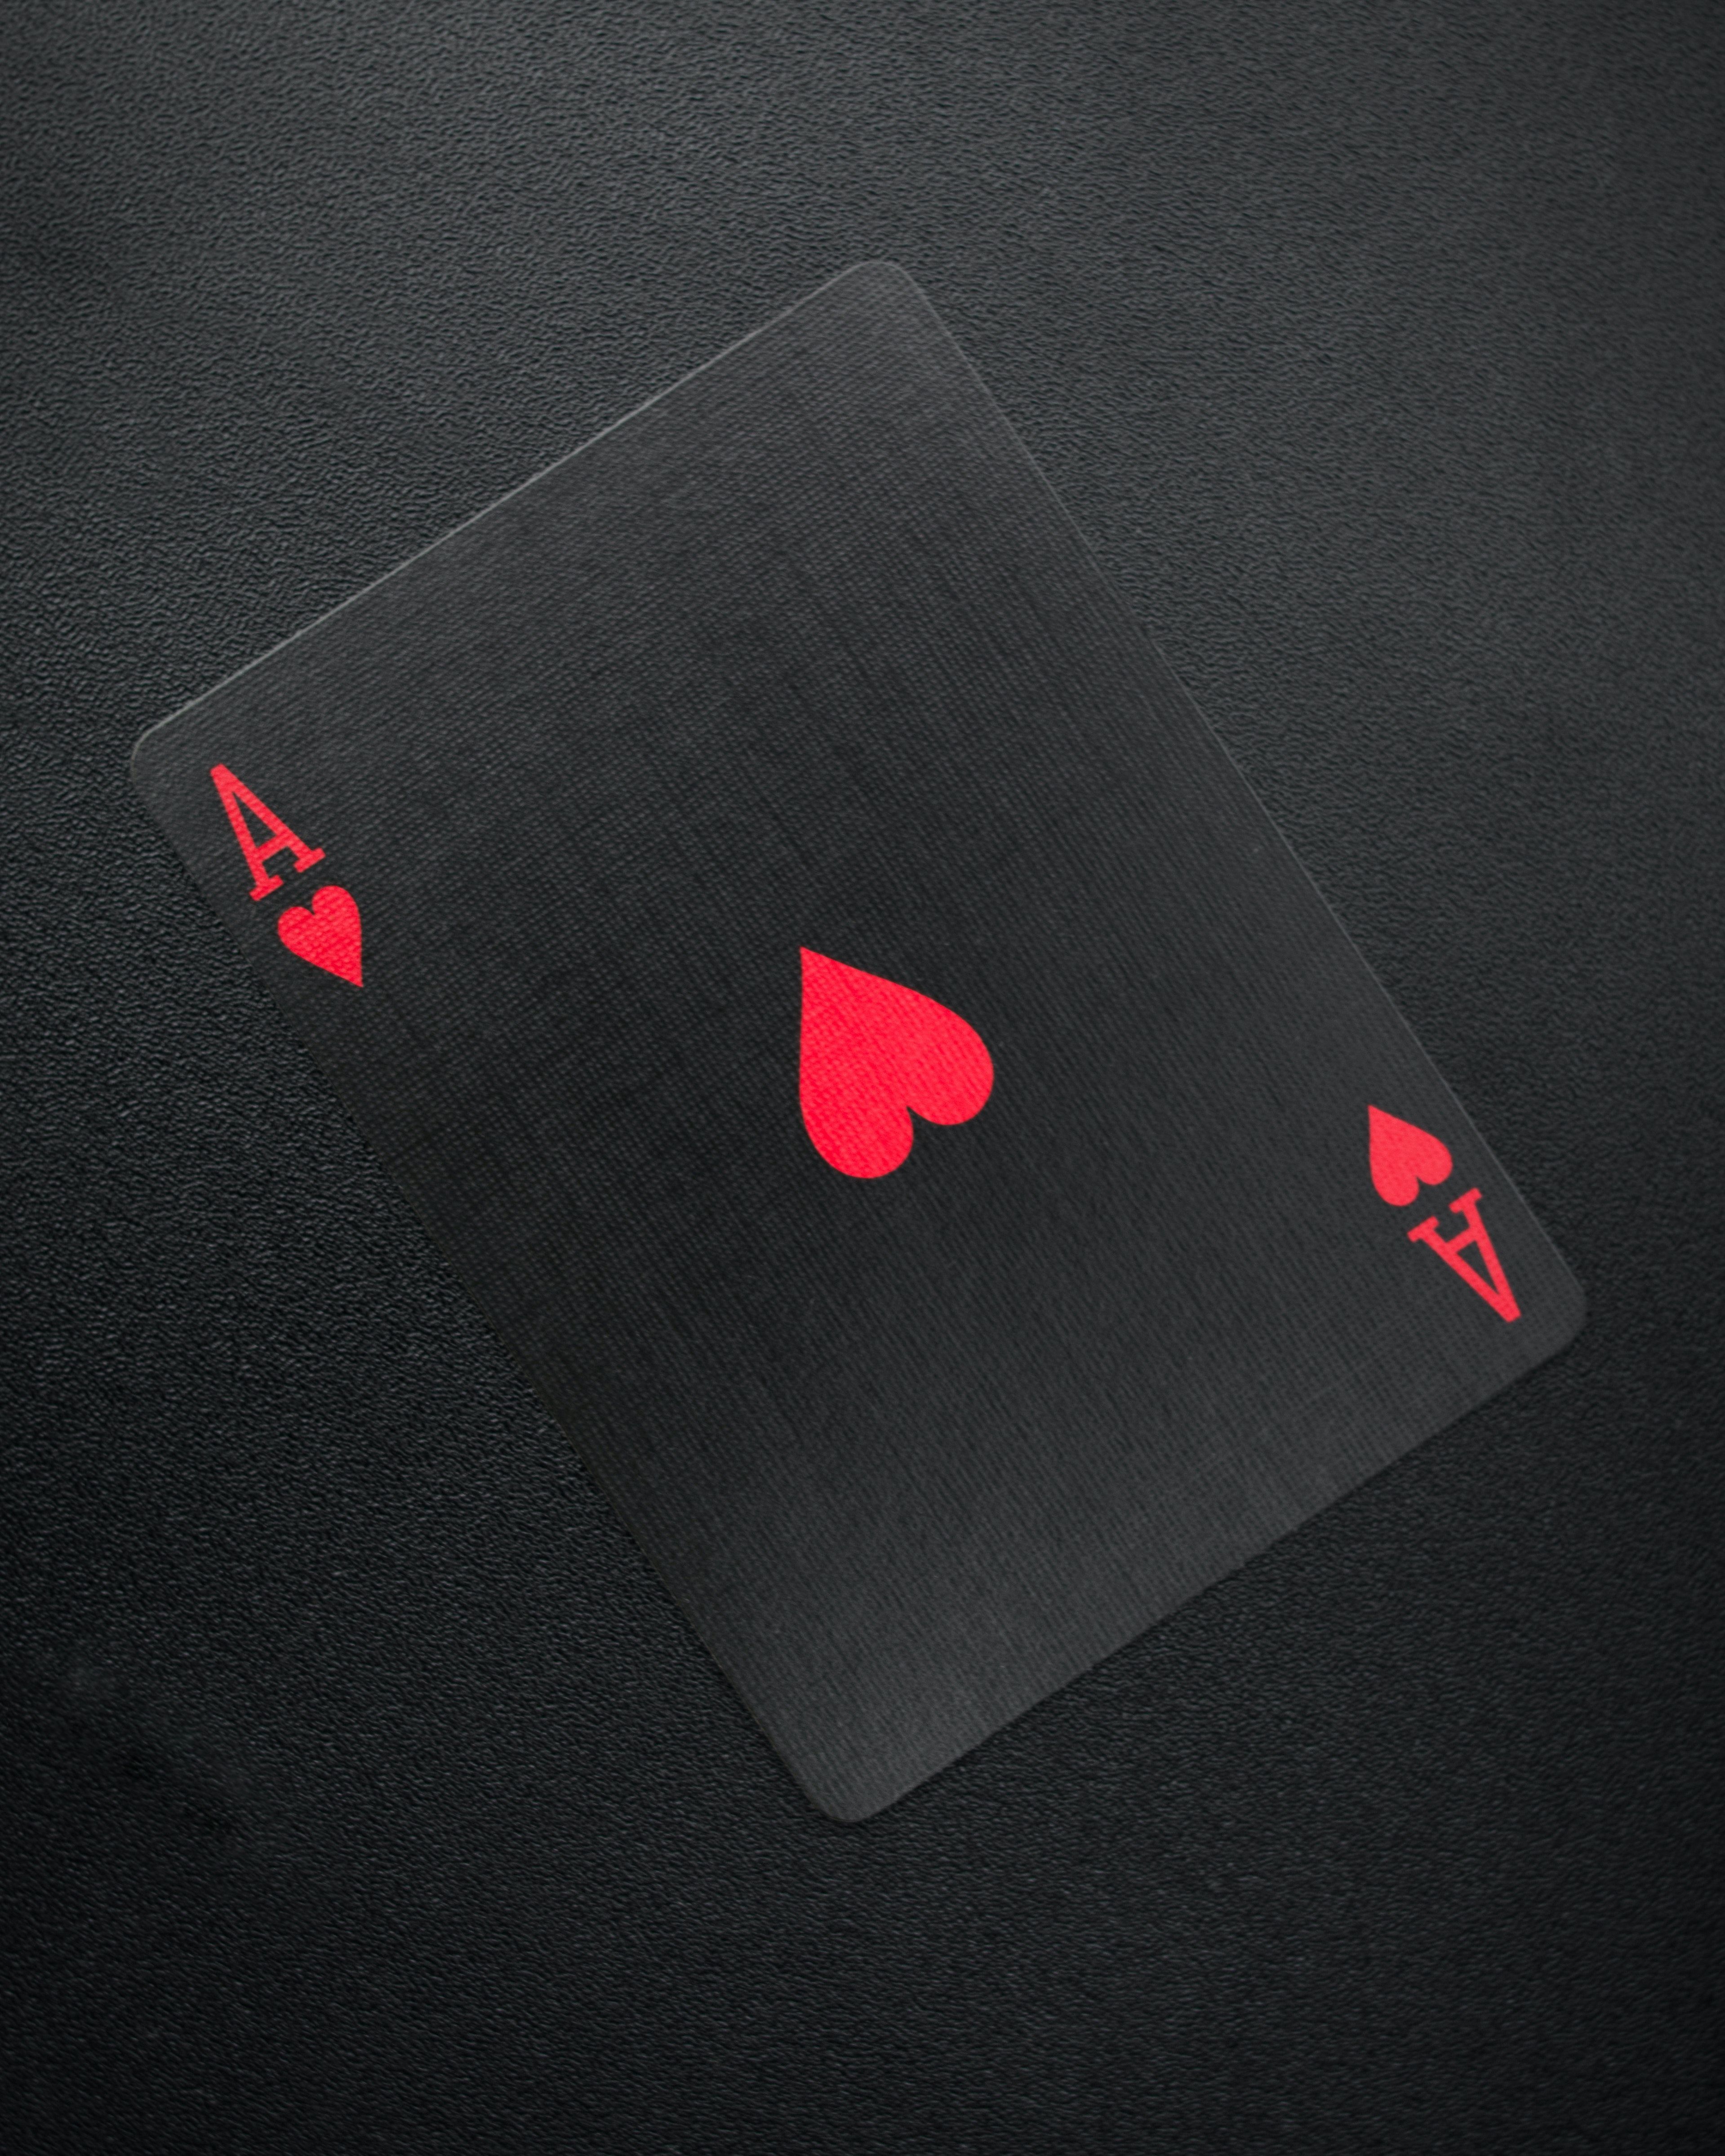 Ace of Hearts Card on Black Background · Free